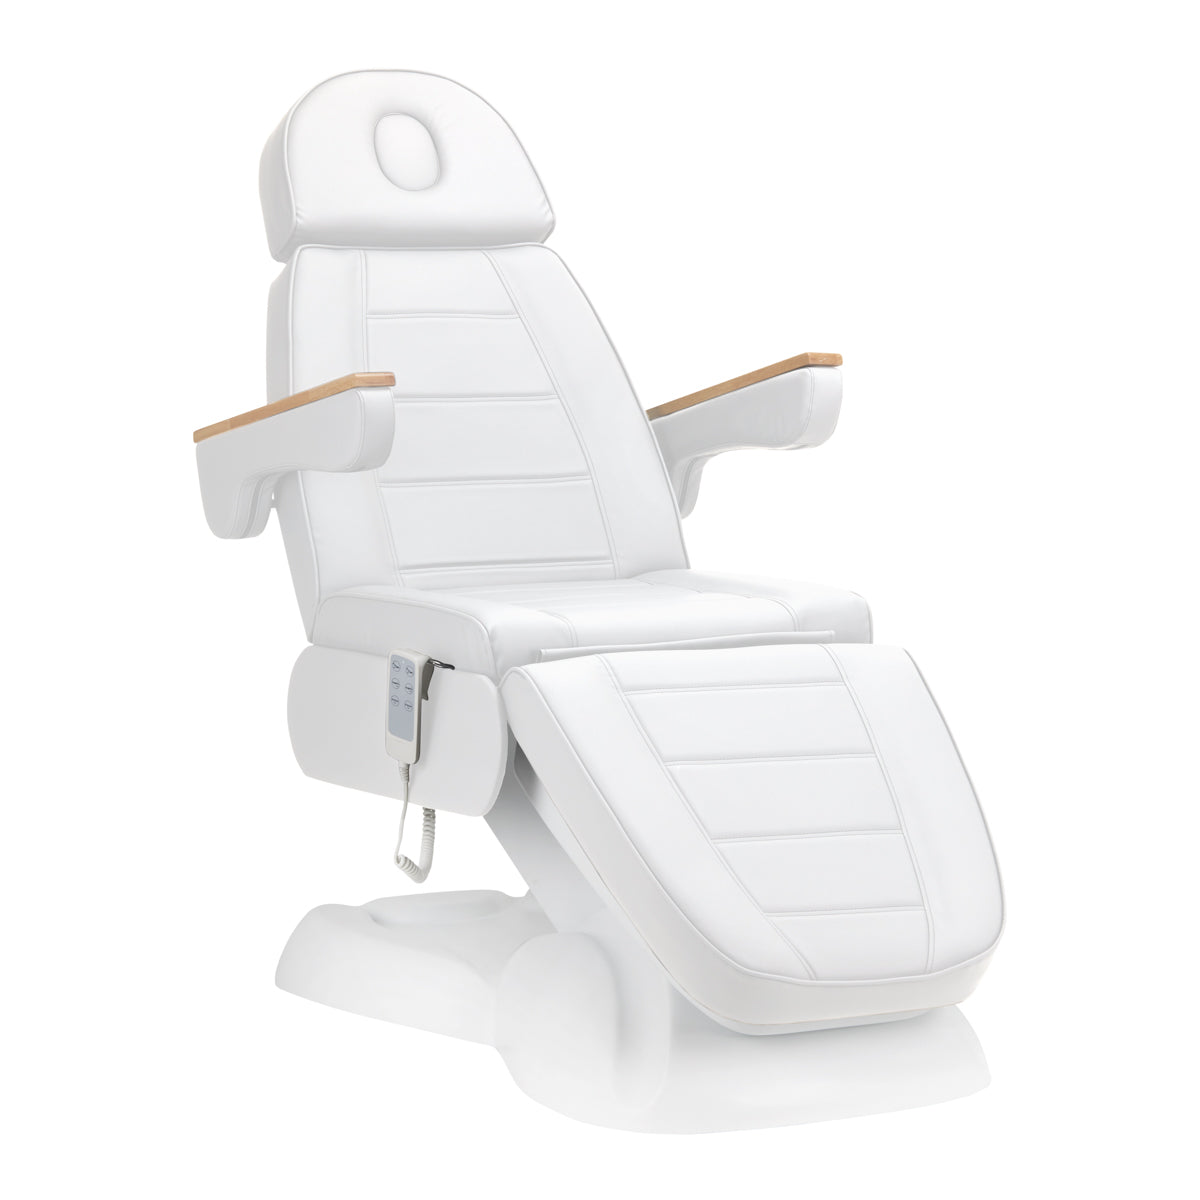 Electric cosmetic chair SILLON Lux 273b 3 motors white